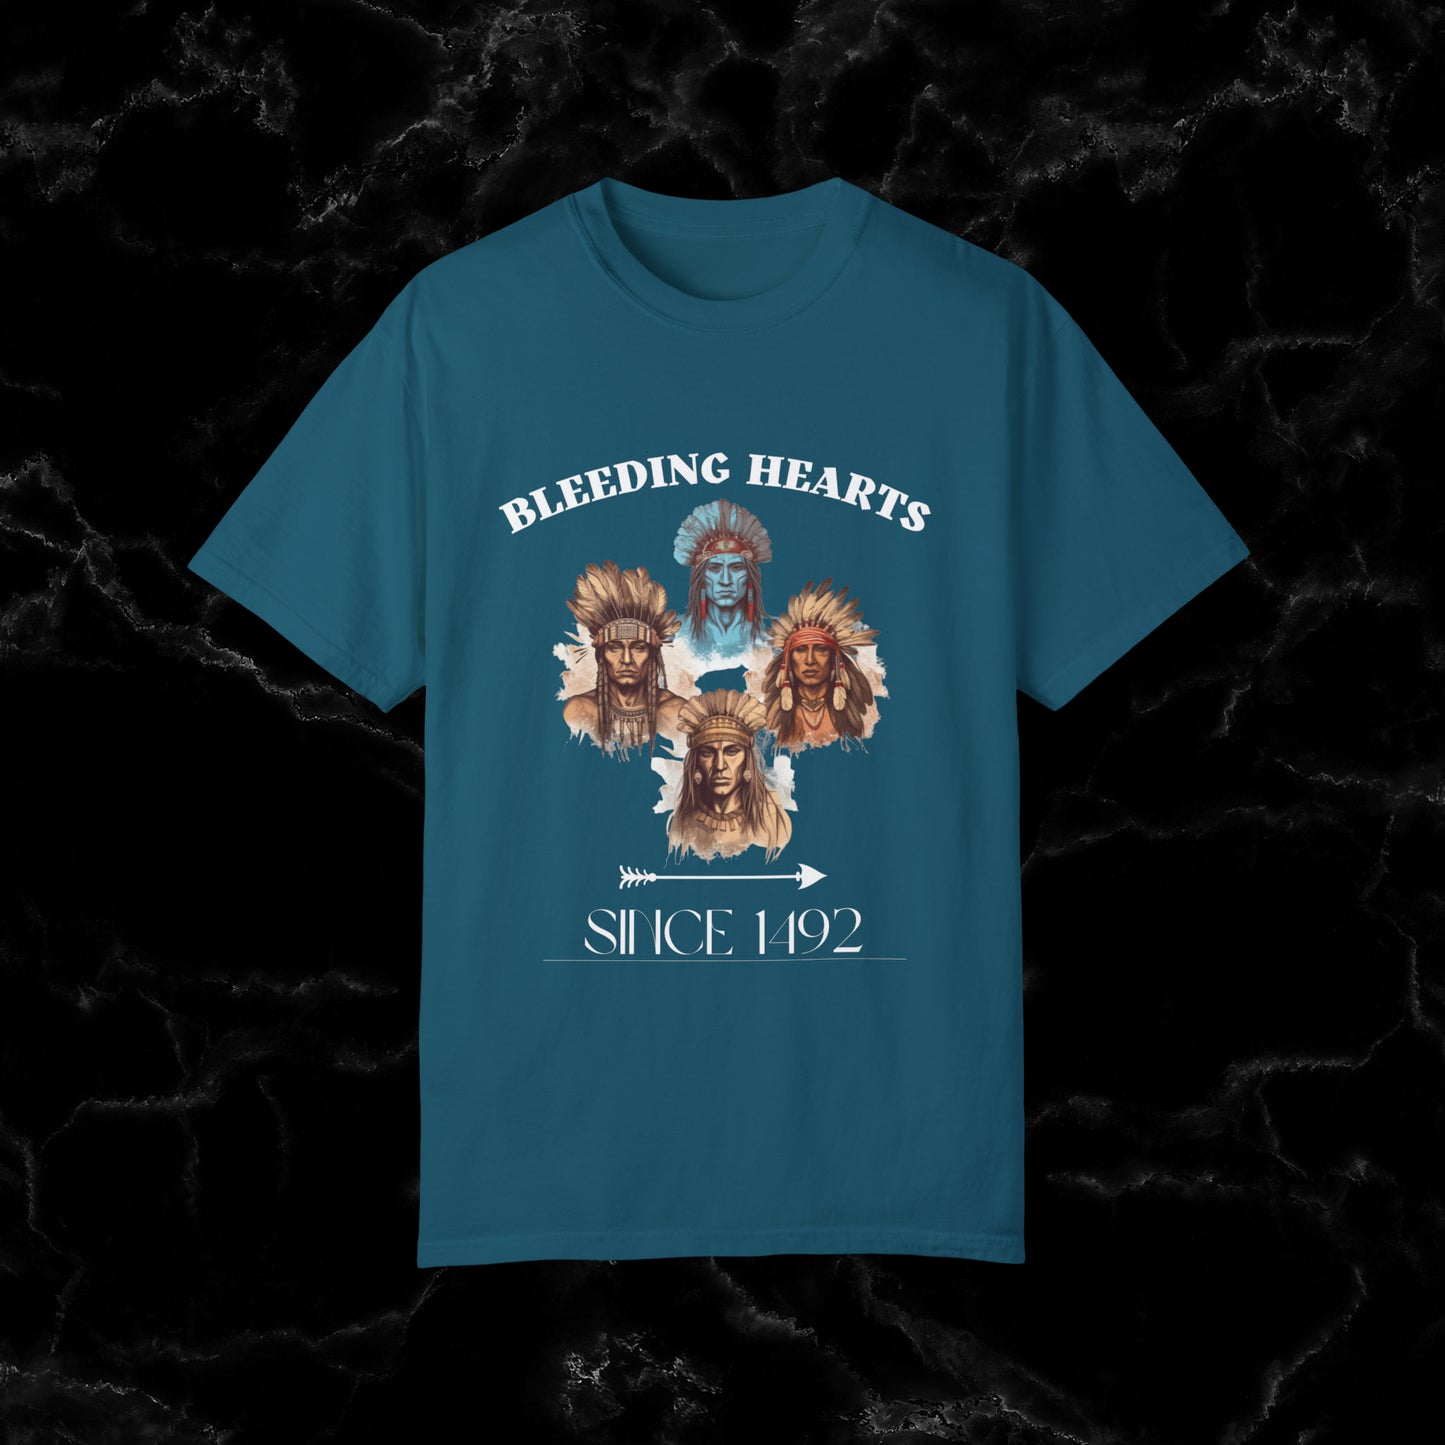 Native American Comfort Colors Shirt - Authentic Tribal Design, Nature-Inspired Apparel, 'Bleeding Hearts since 1492 T-Shirt Topaz Blue S 